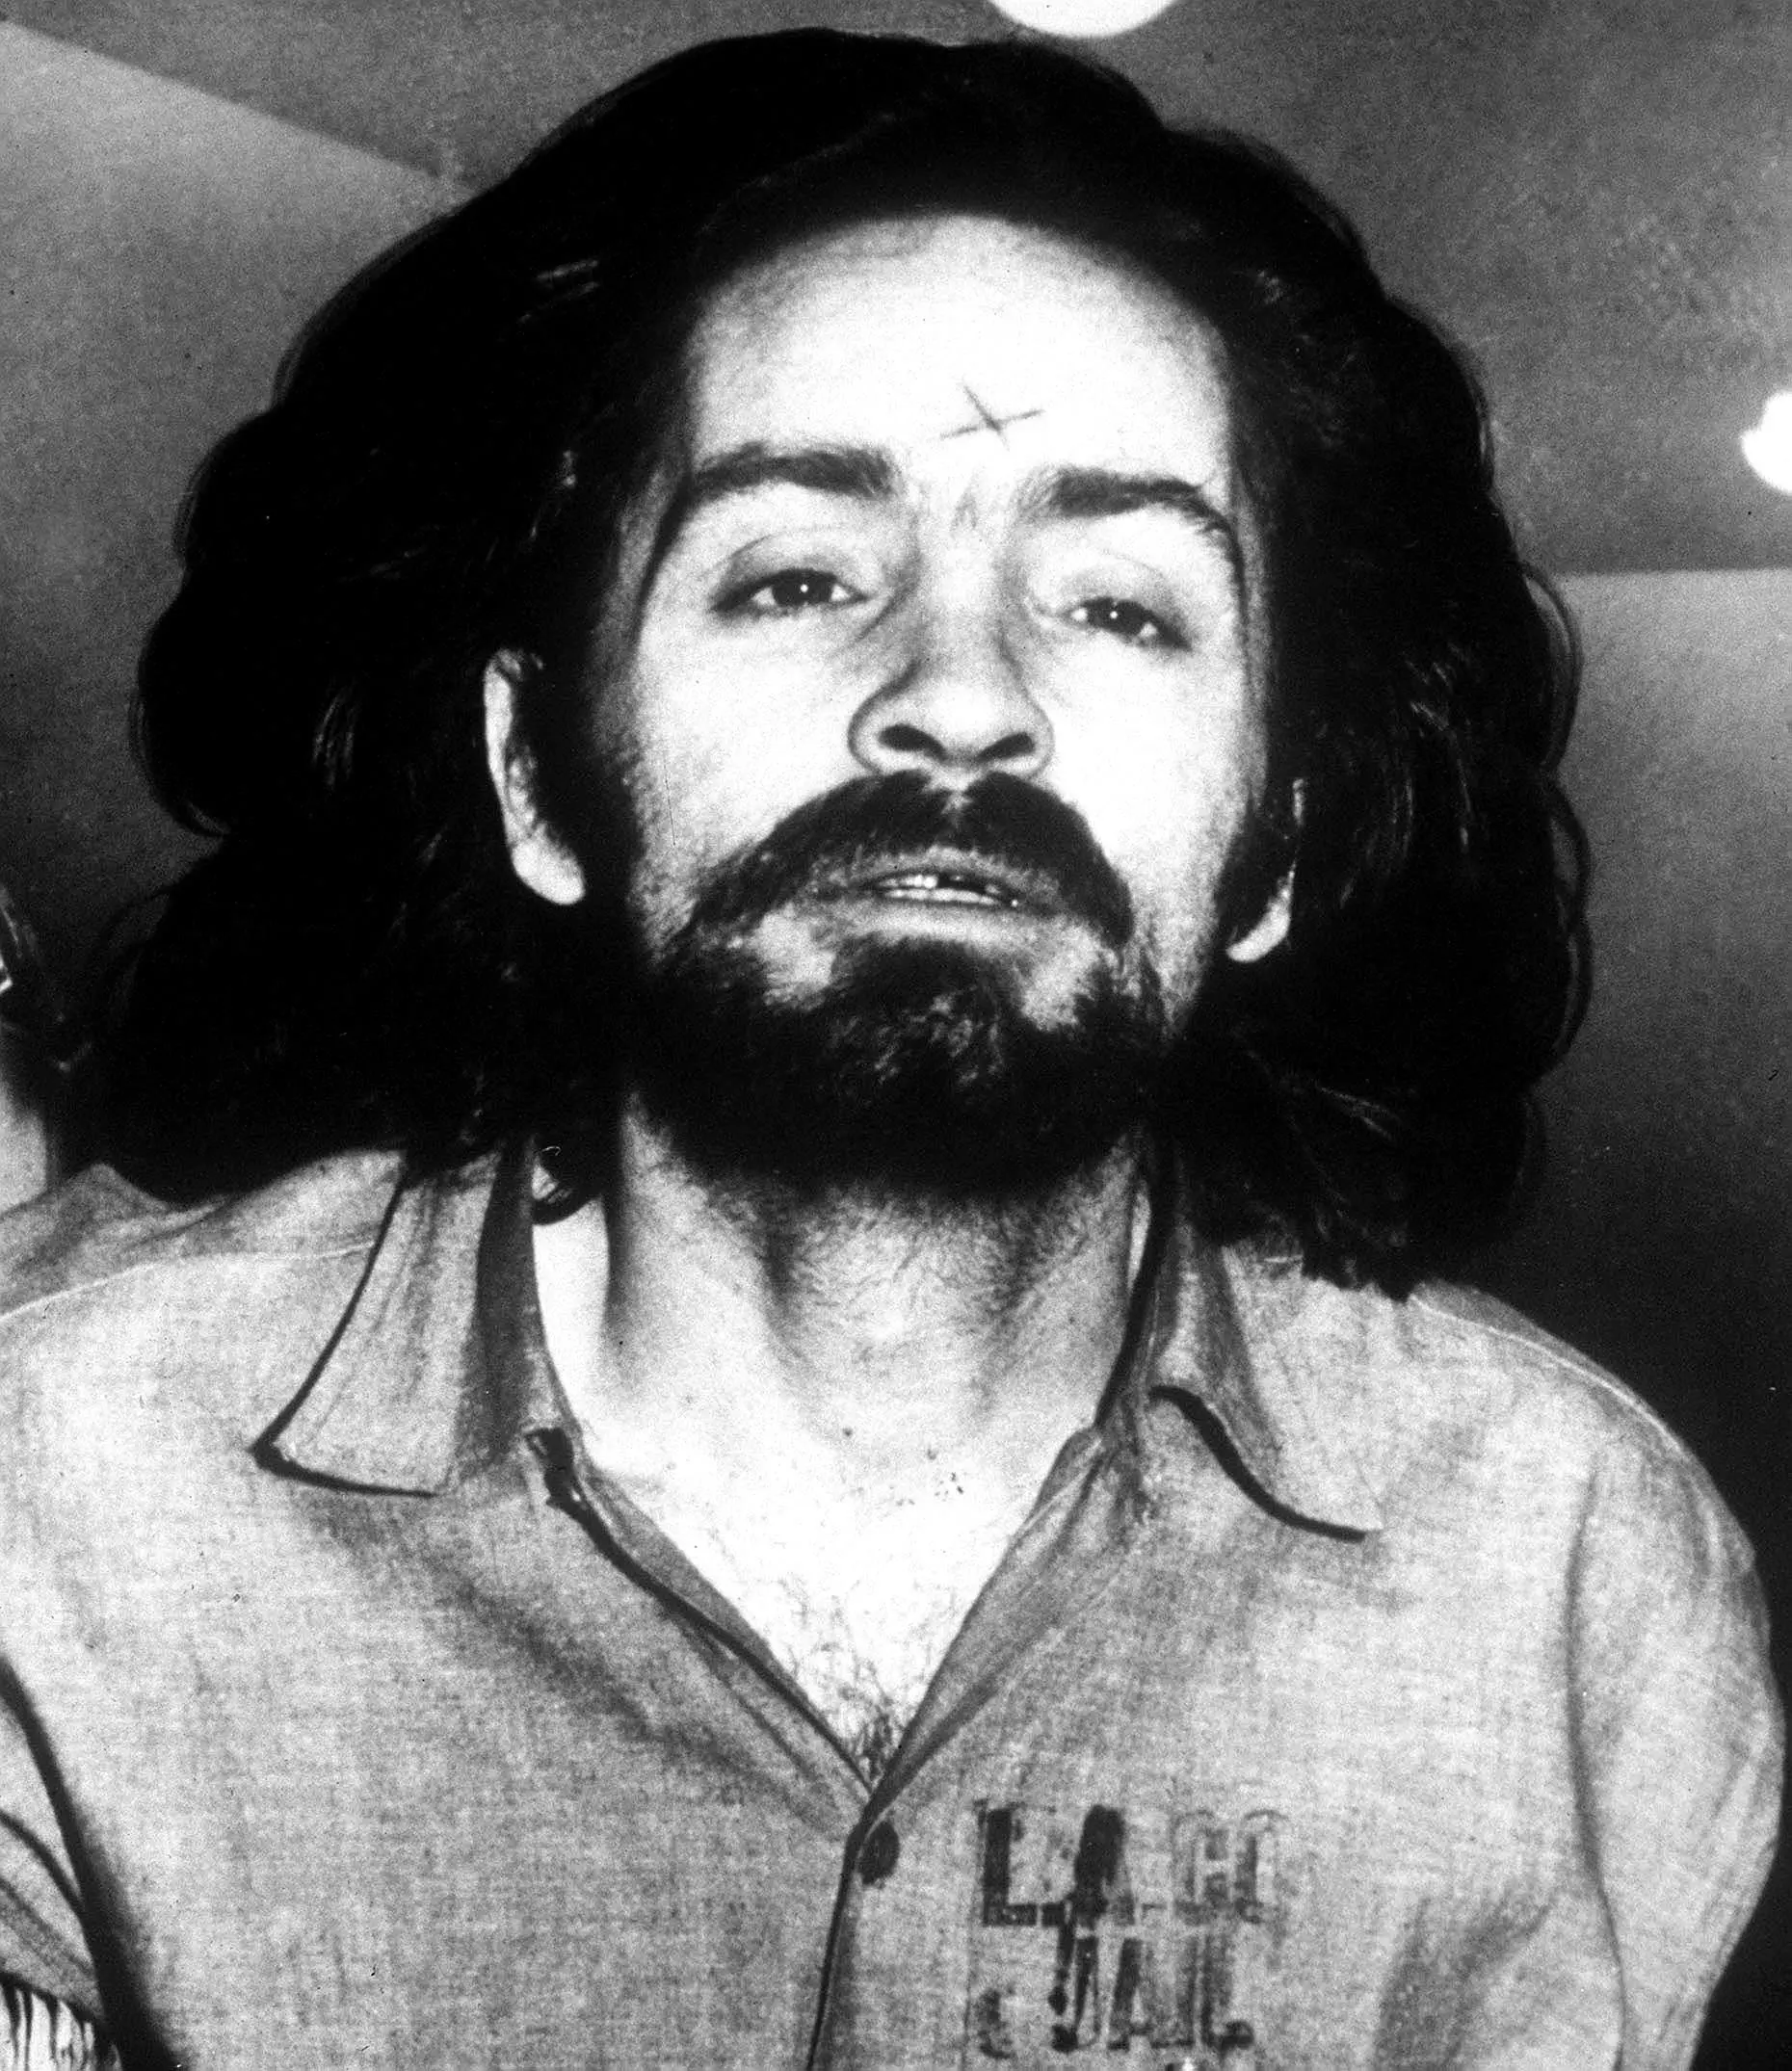 Cult leader Manson ordered four of his followers to kill.